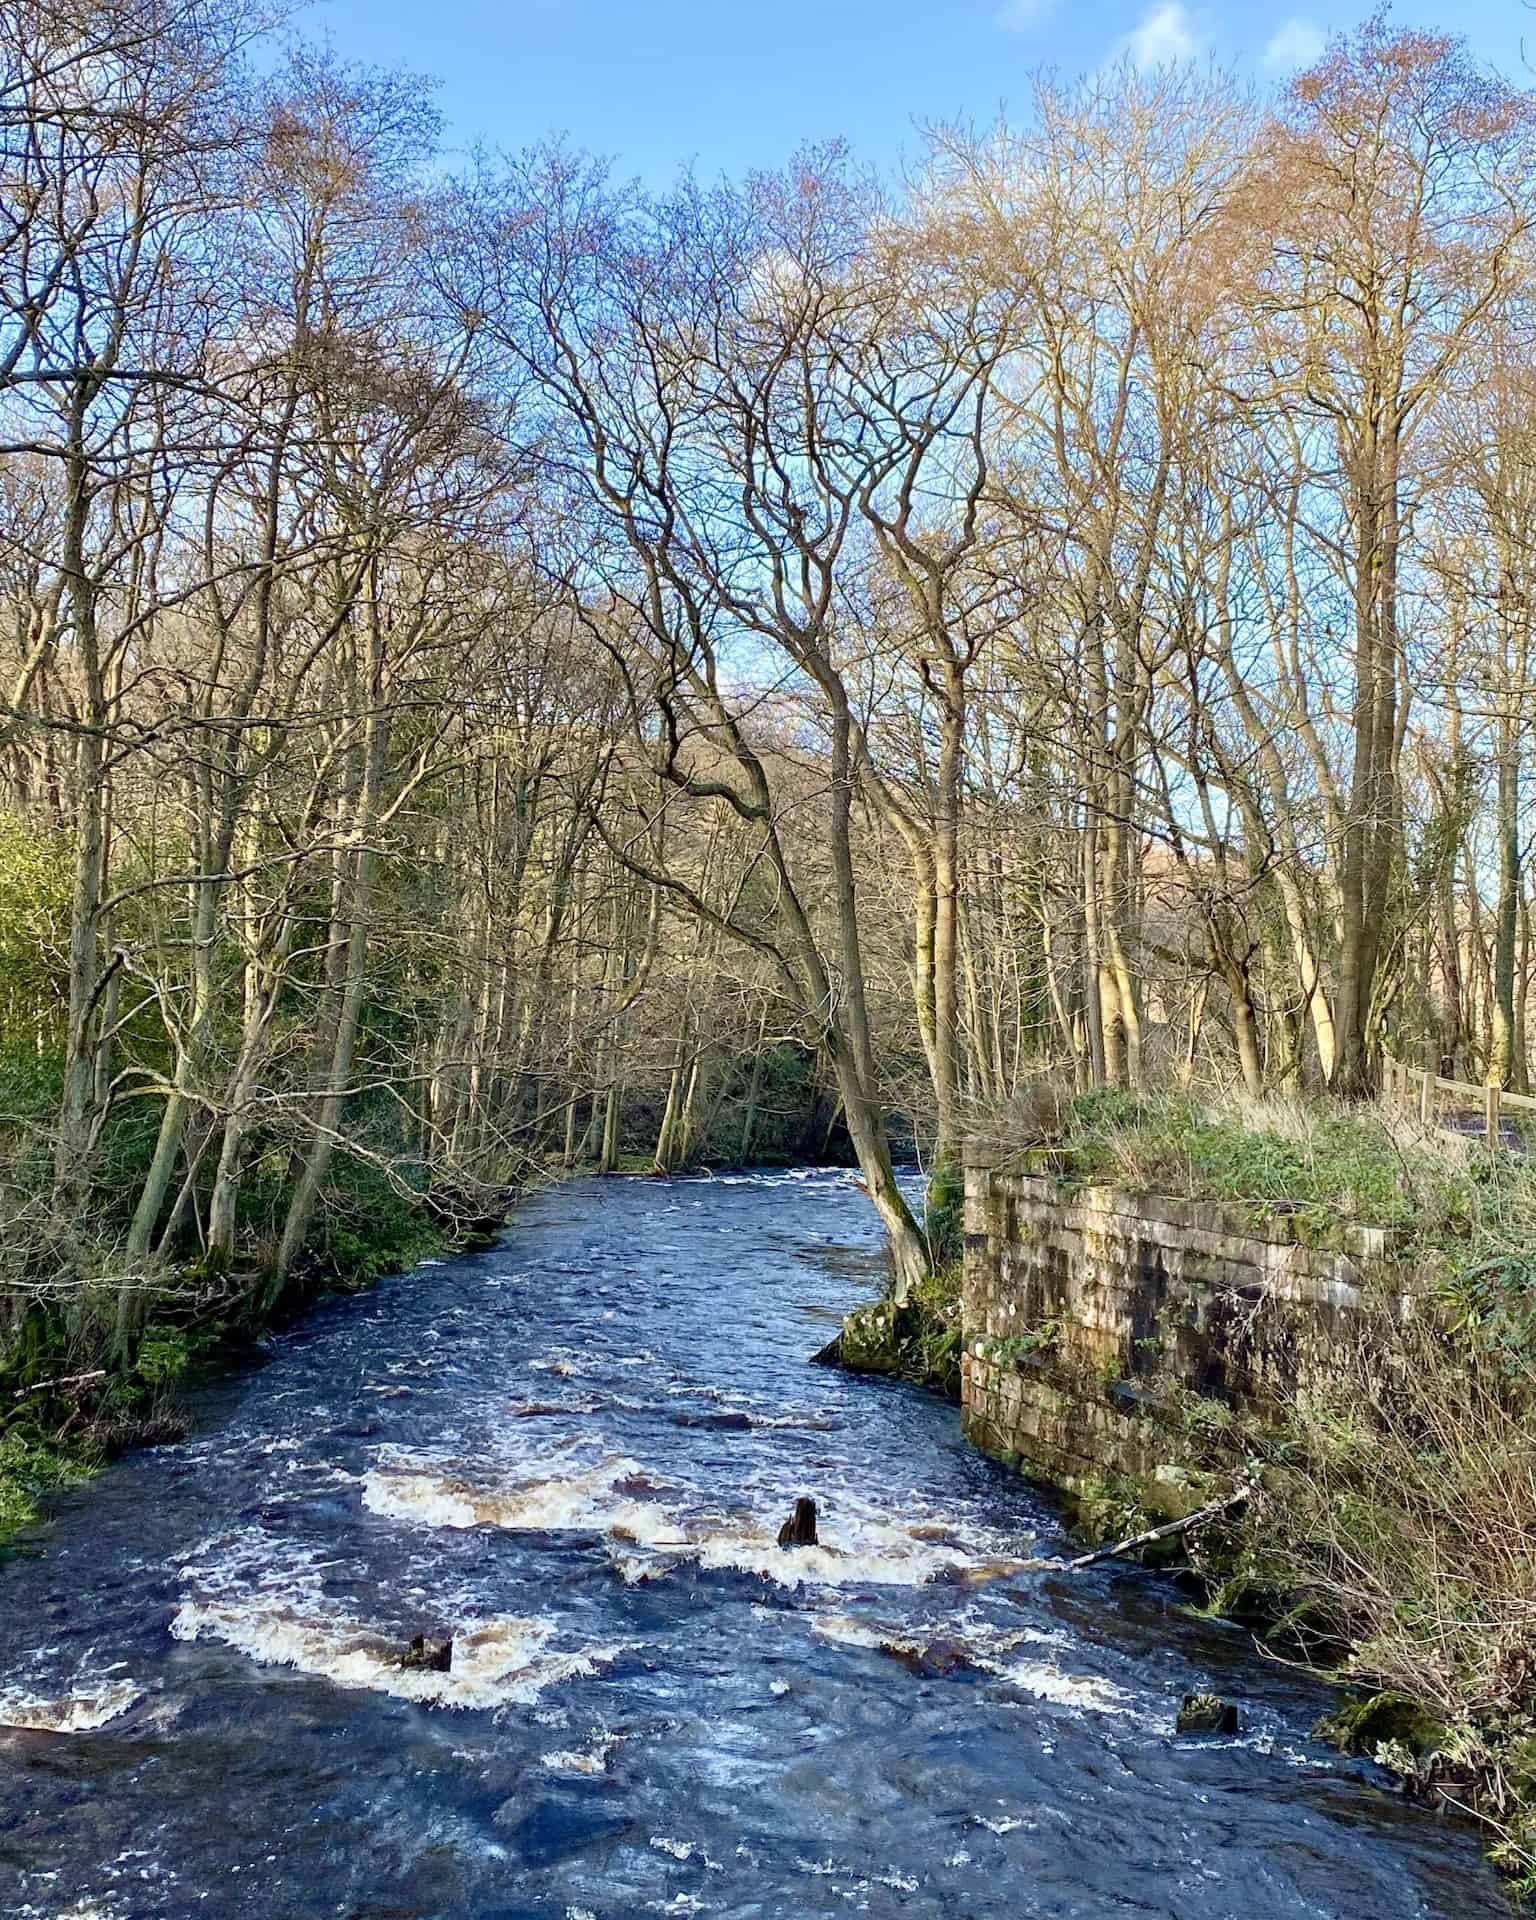 Don't judge a river by its colour! Like most watercourses in the area, the Murk Esk catches water from large areas of moorland, resulting in its brown, peaty colour. Despite this, the water quality is generally very high, which makes it a significant habitat for wildlife.